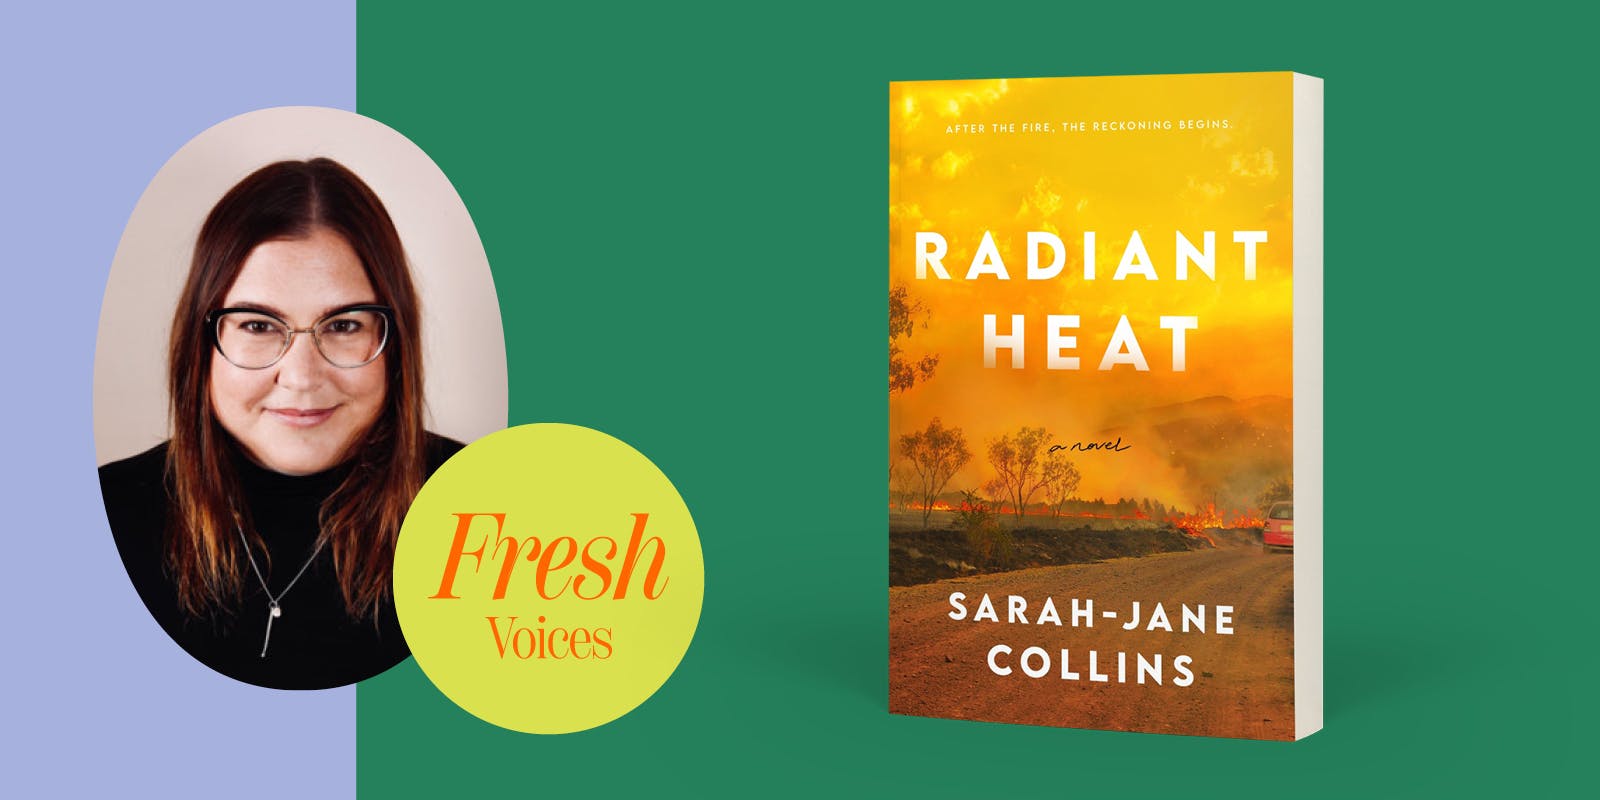 Fun Fact: Sarah-Jane Collins wrote much of her debut novel in a bar